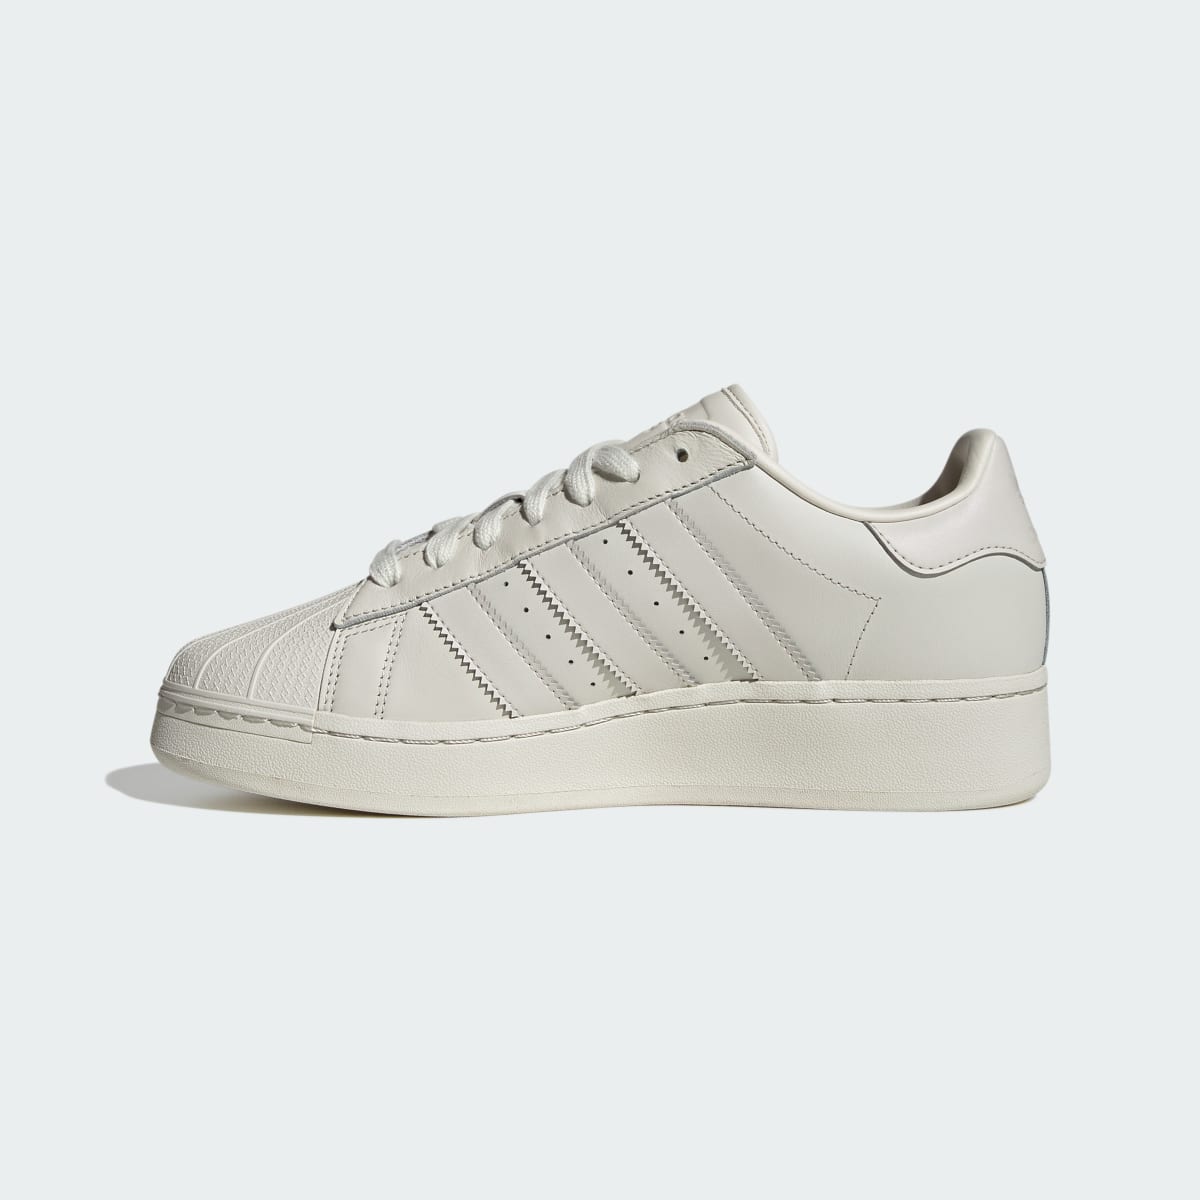 Adidas Superstar XLG Shoes. 7